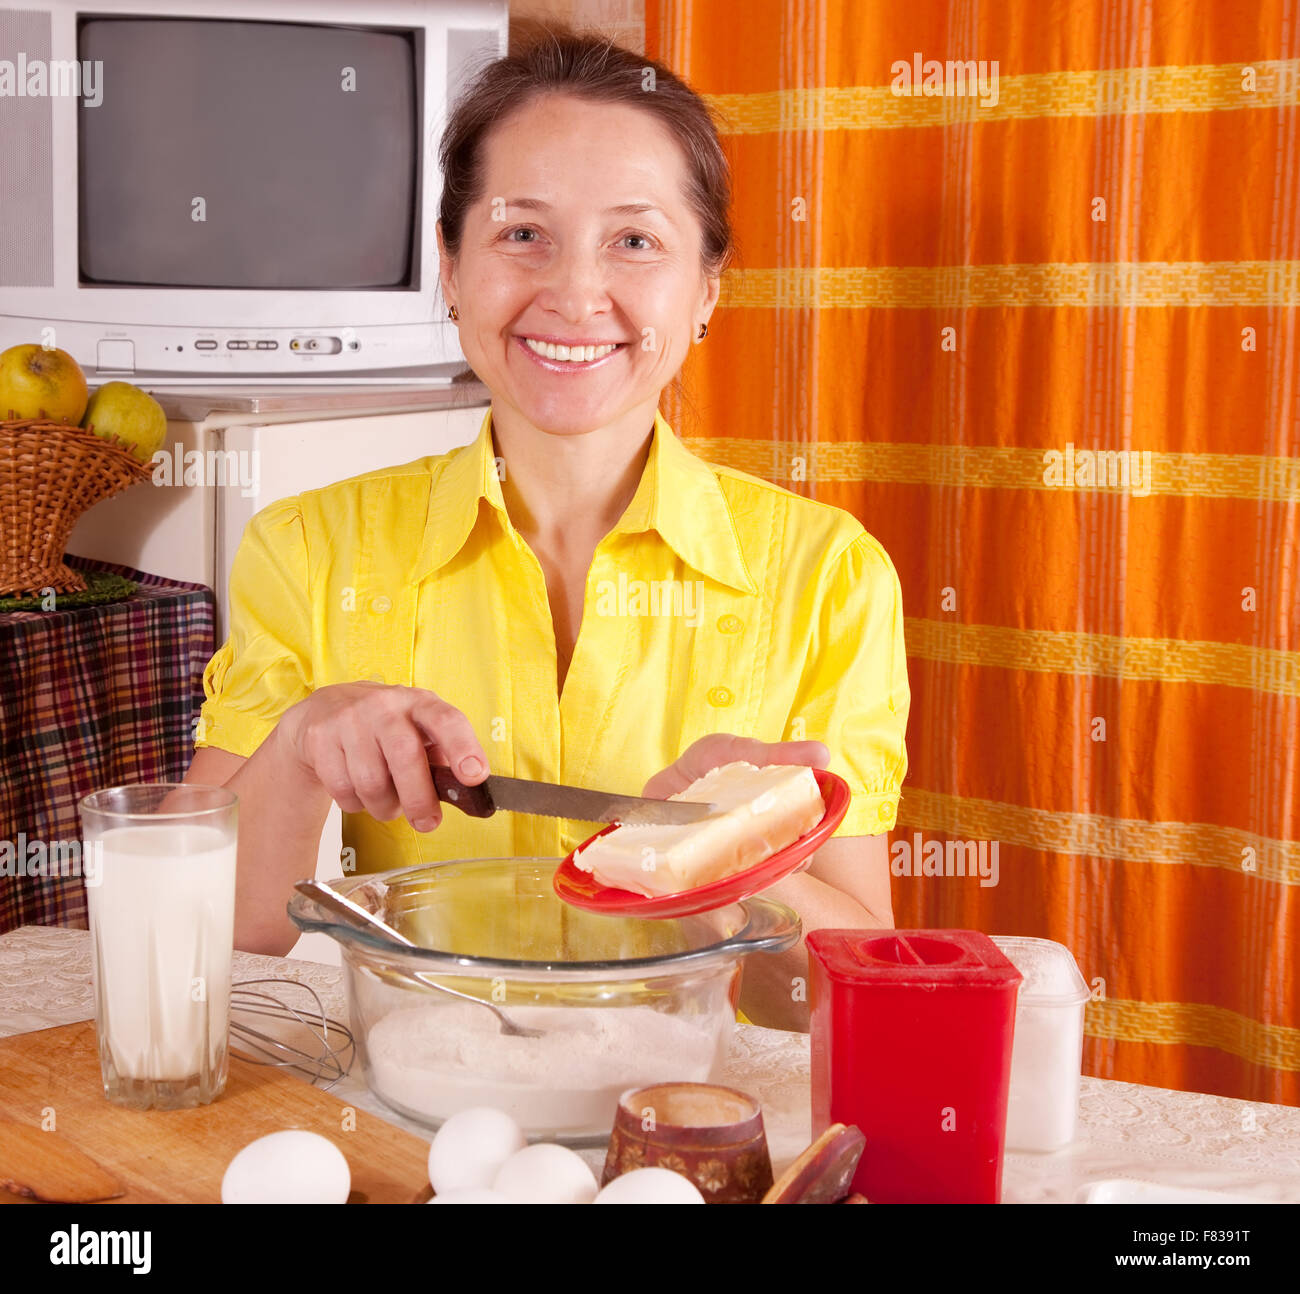 Smiling woman adds margarine into dough in kitchen Stock Photo